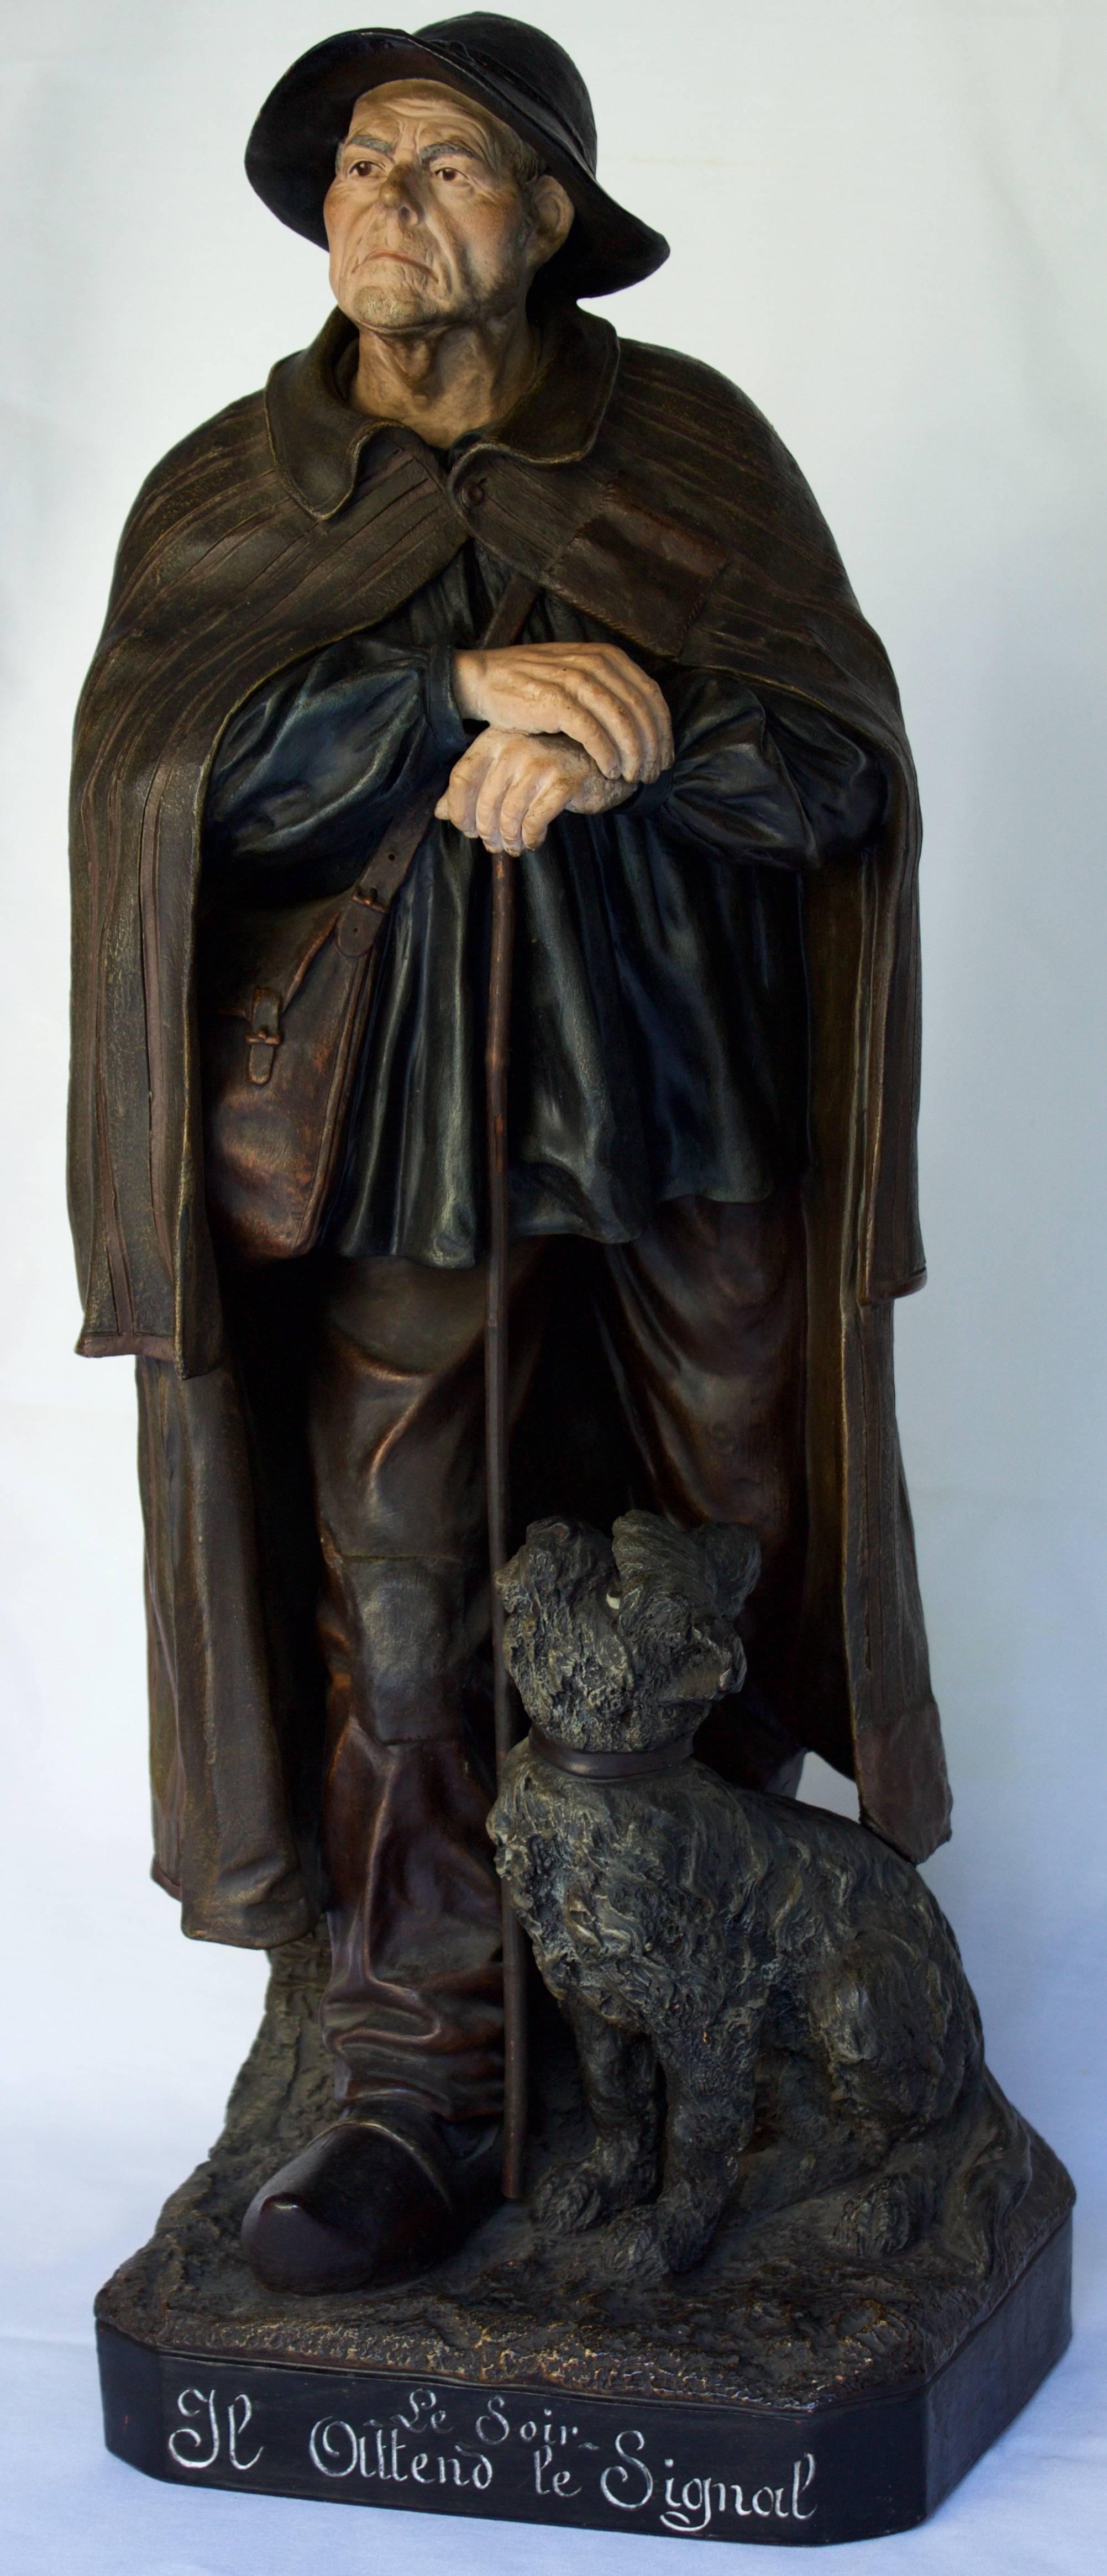 Marvellous terra cotta sculpture by Joseph Le Guluche (1849-1915),the most famous Artist of L'Isle Adam (city next to Paris) by the quality and the importance of his creations. Here it represent a 